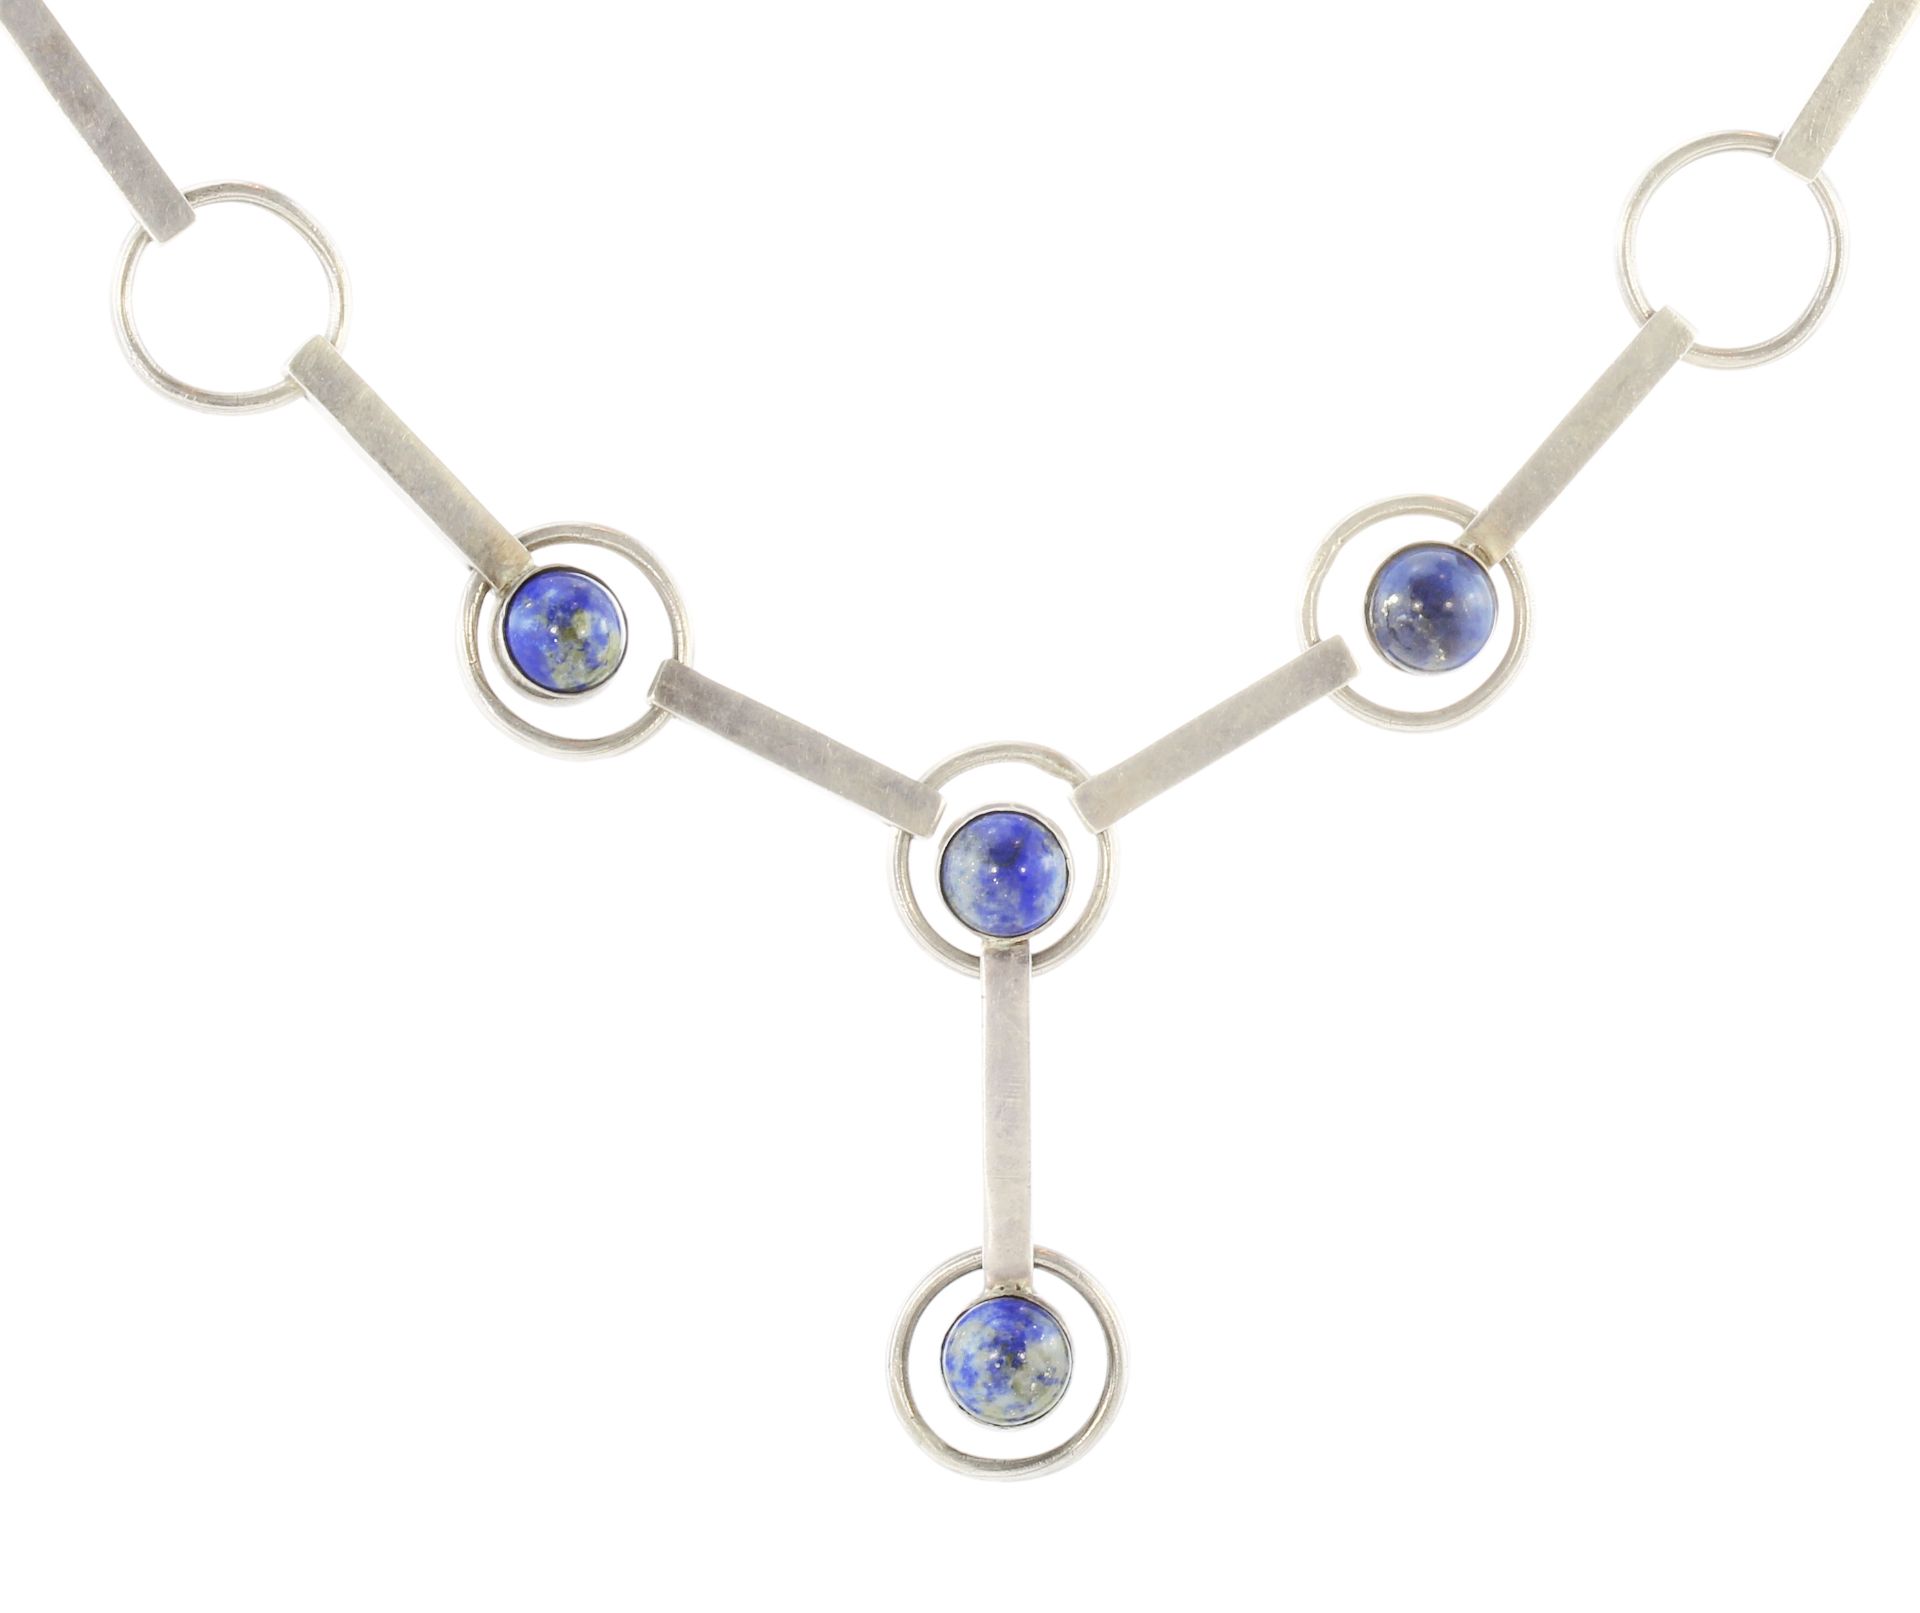 A vintage lapis lazuli necklace in sterling silver circa 1975 designed as alternating circular and